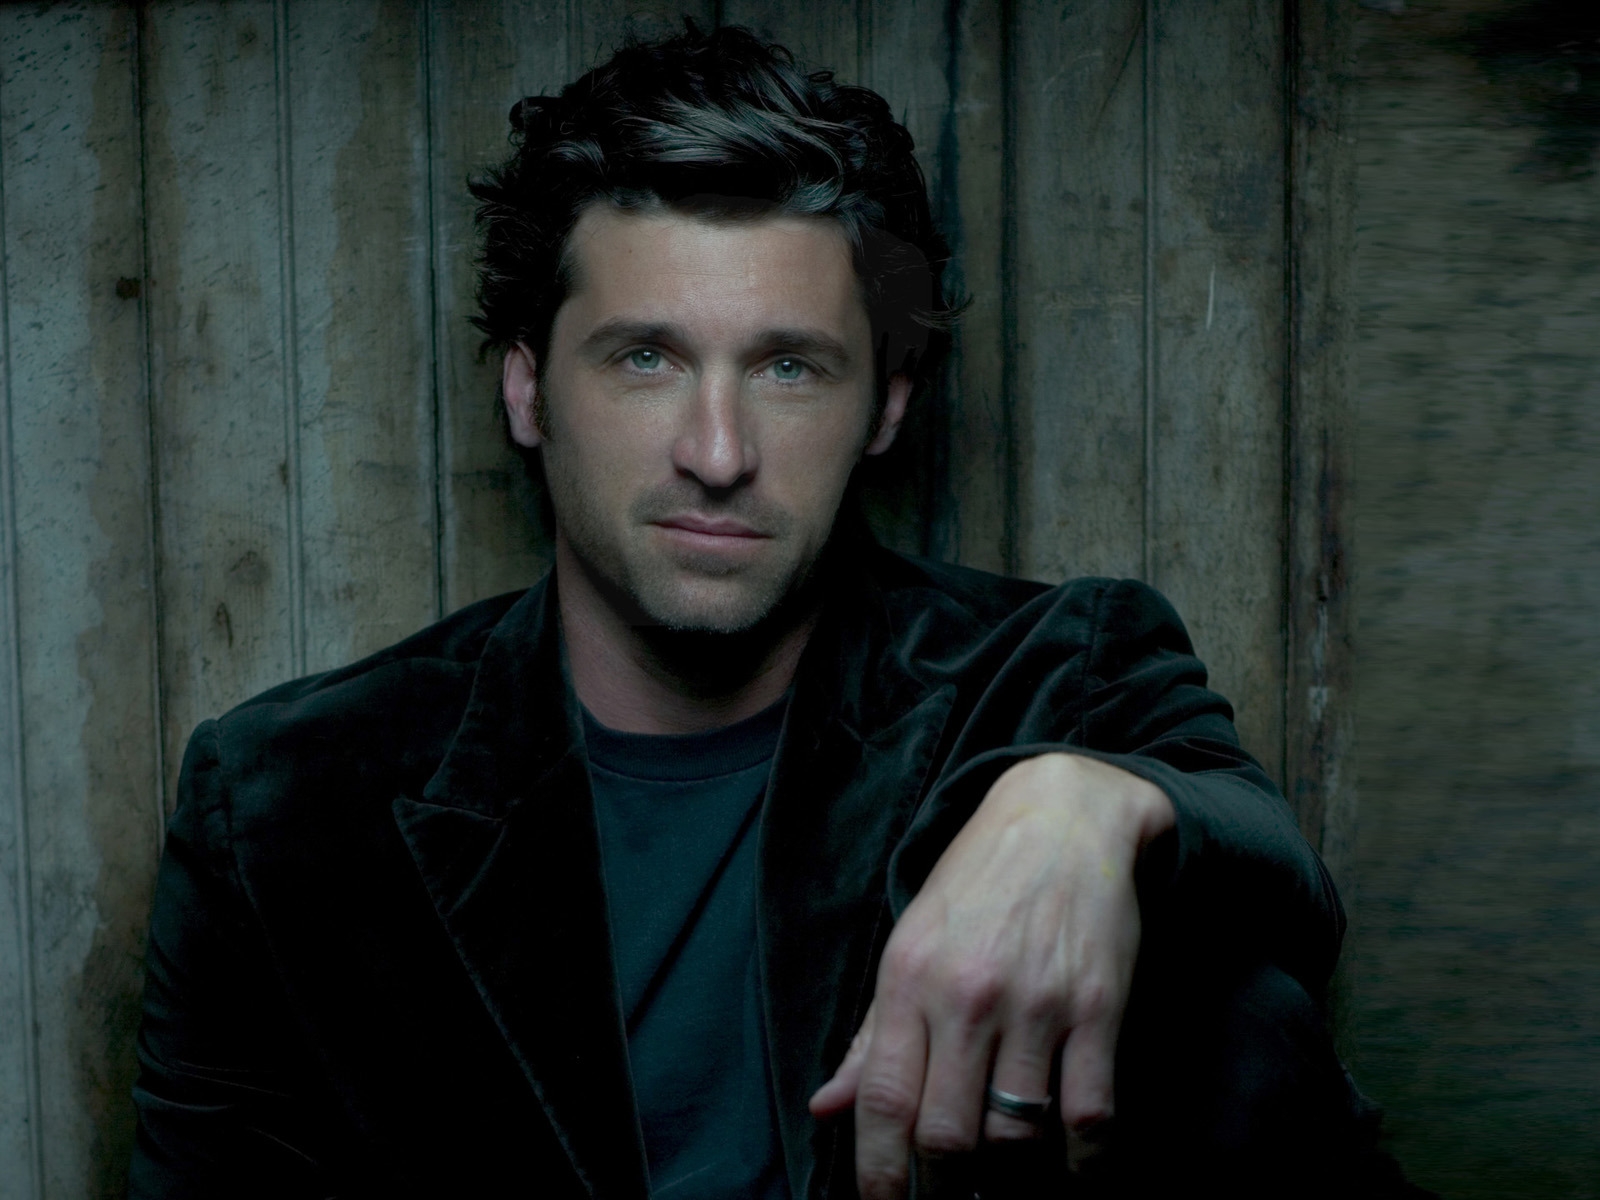 Patrick Dempsey Look for 1600 x 1200 resolution